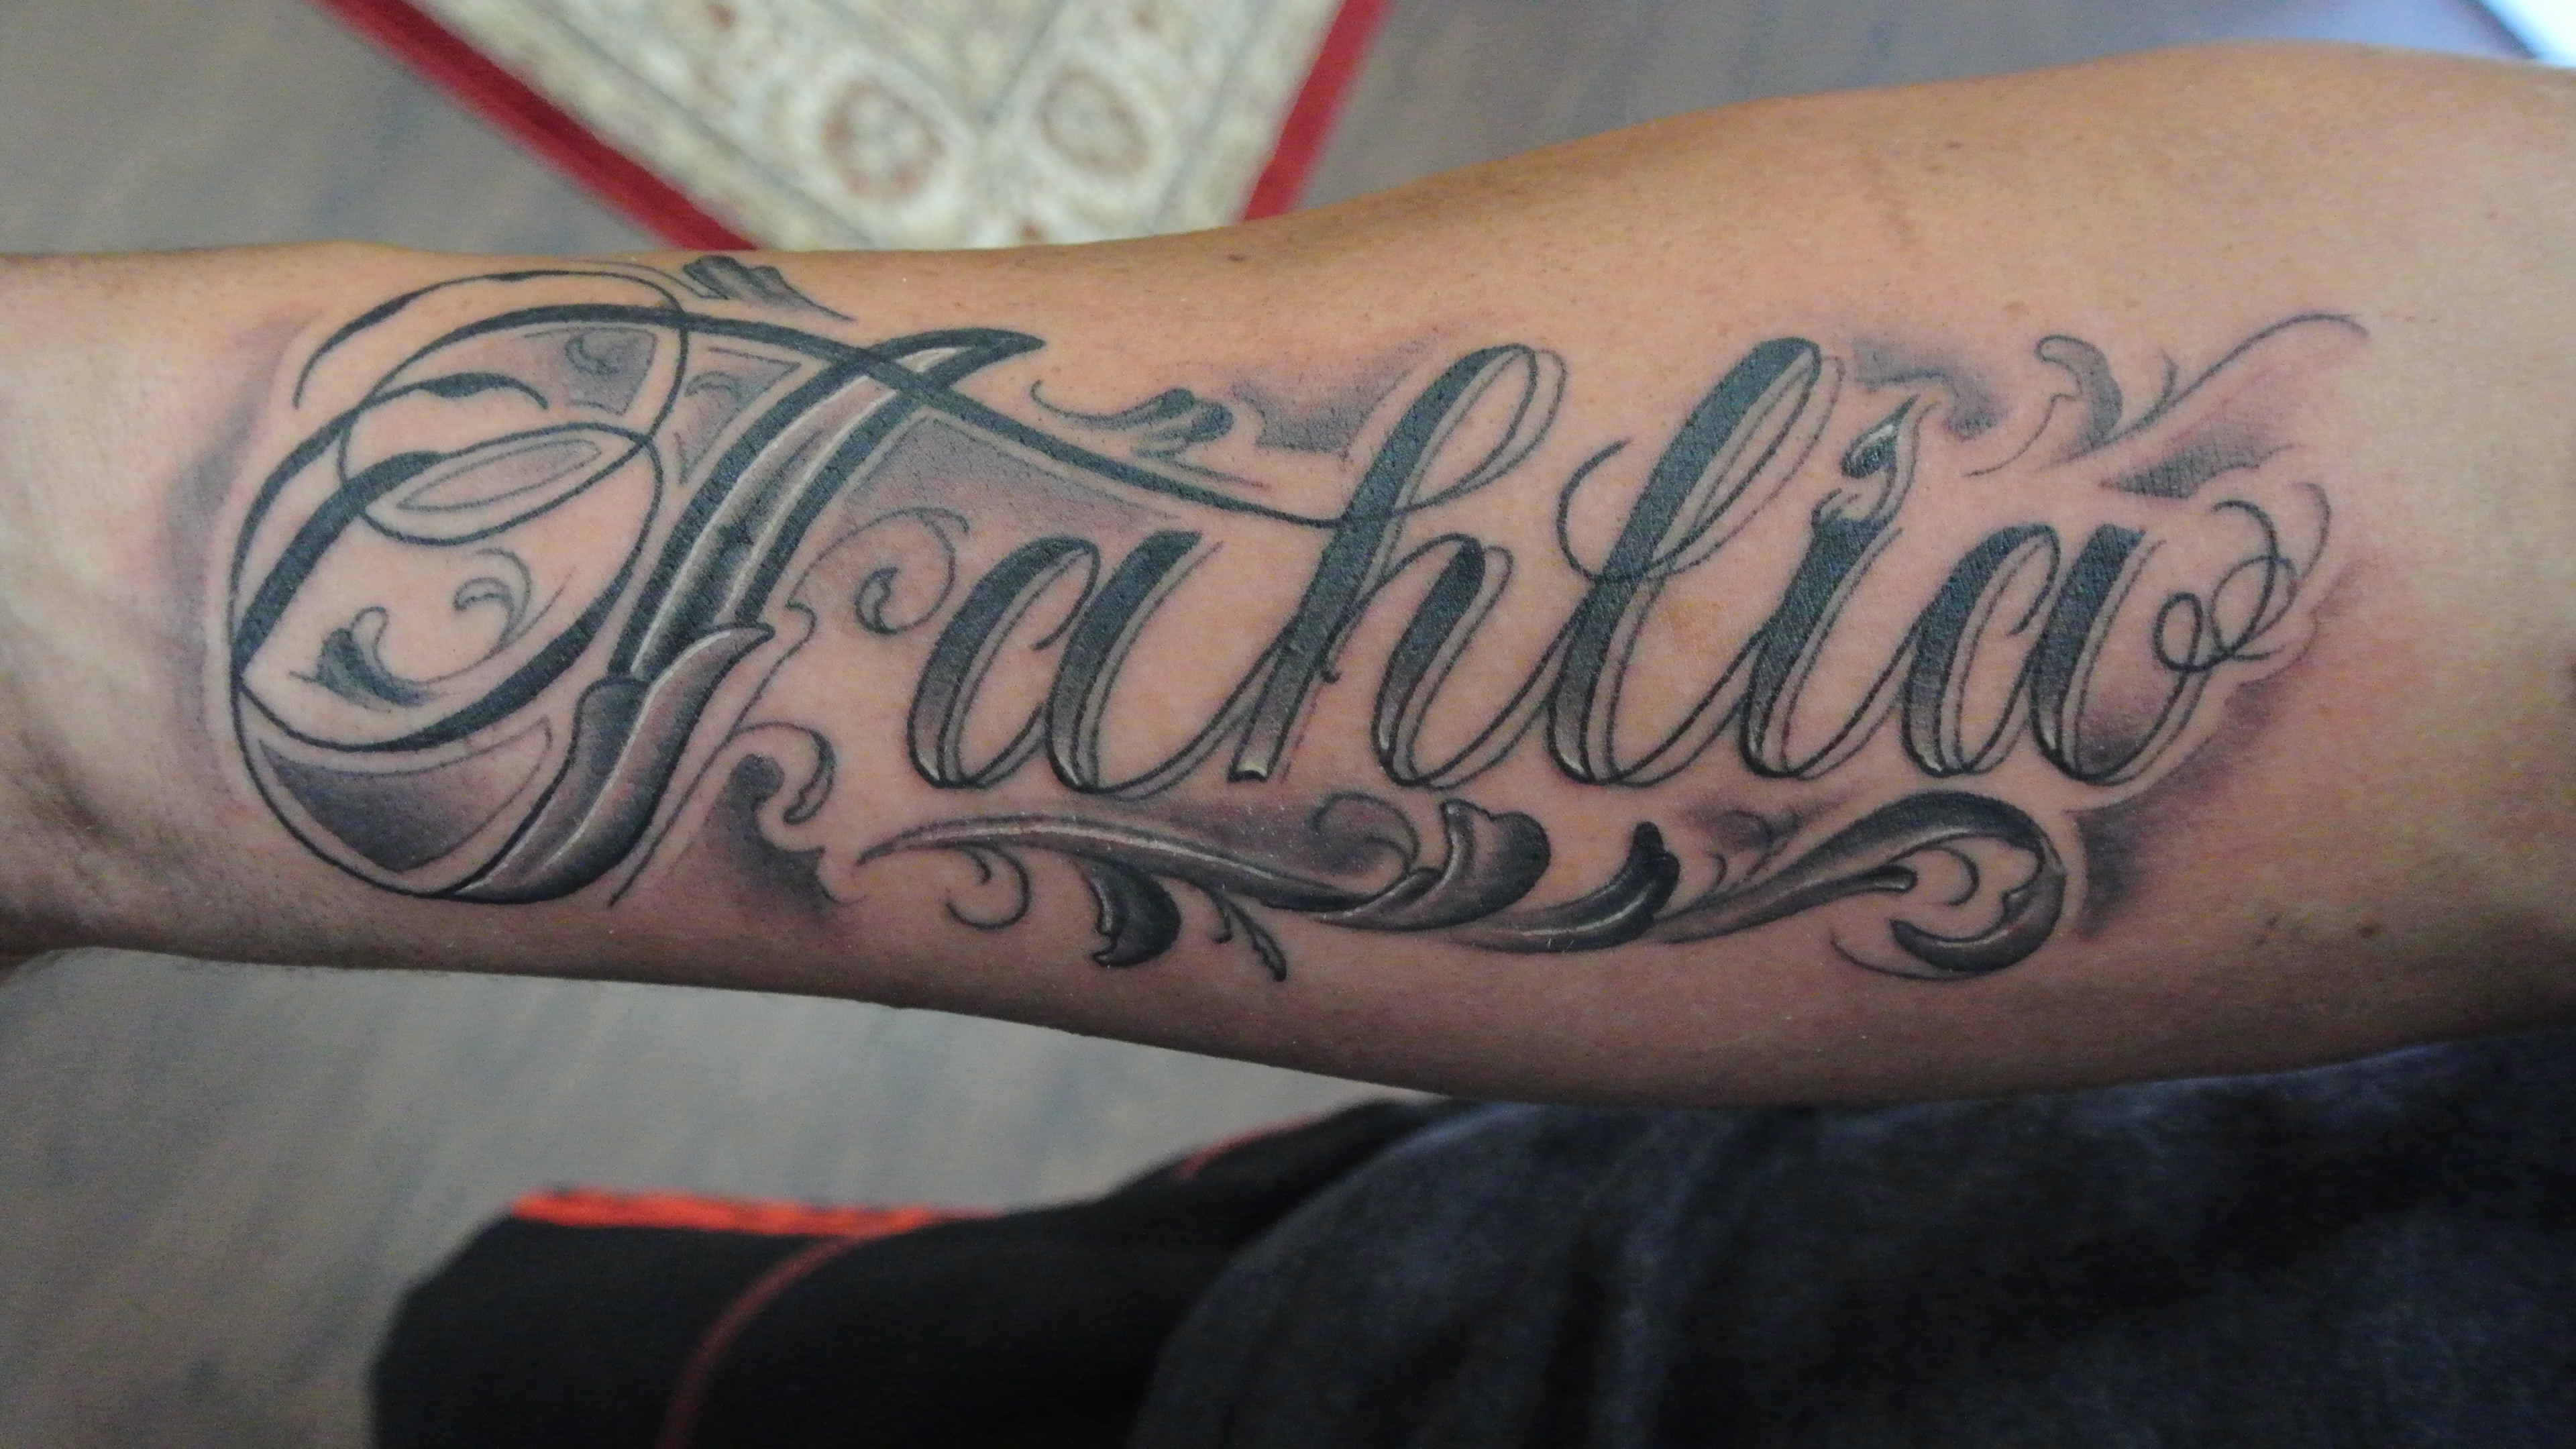 Coolest Tribal Name On Arm Tattoo Design Tattooed Images intended for dimensions 3840 X 2160